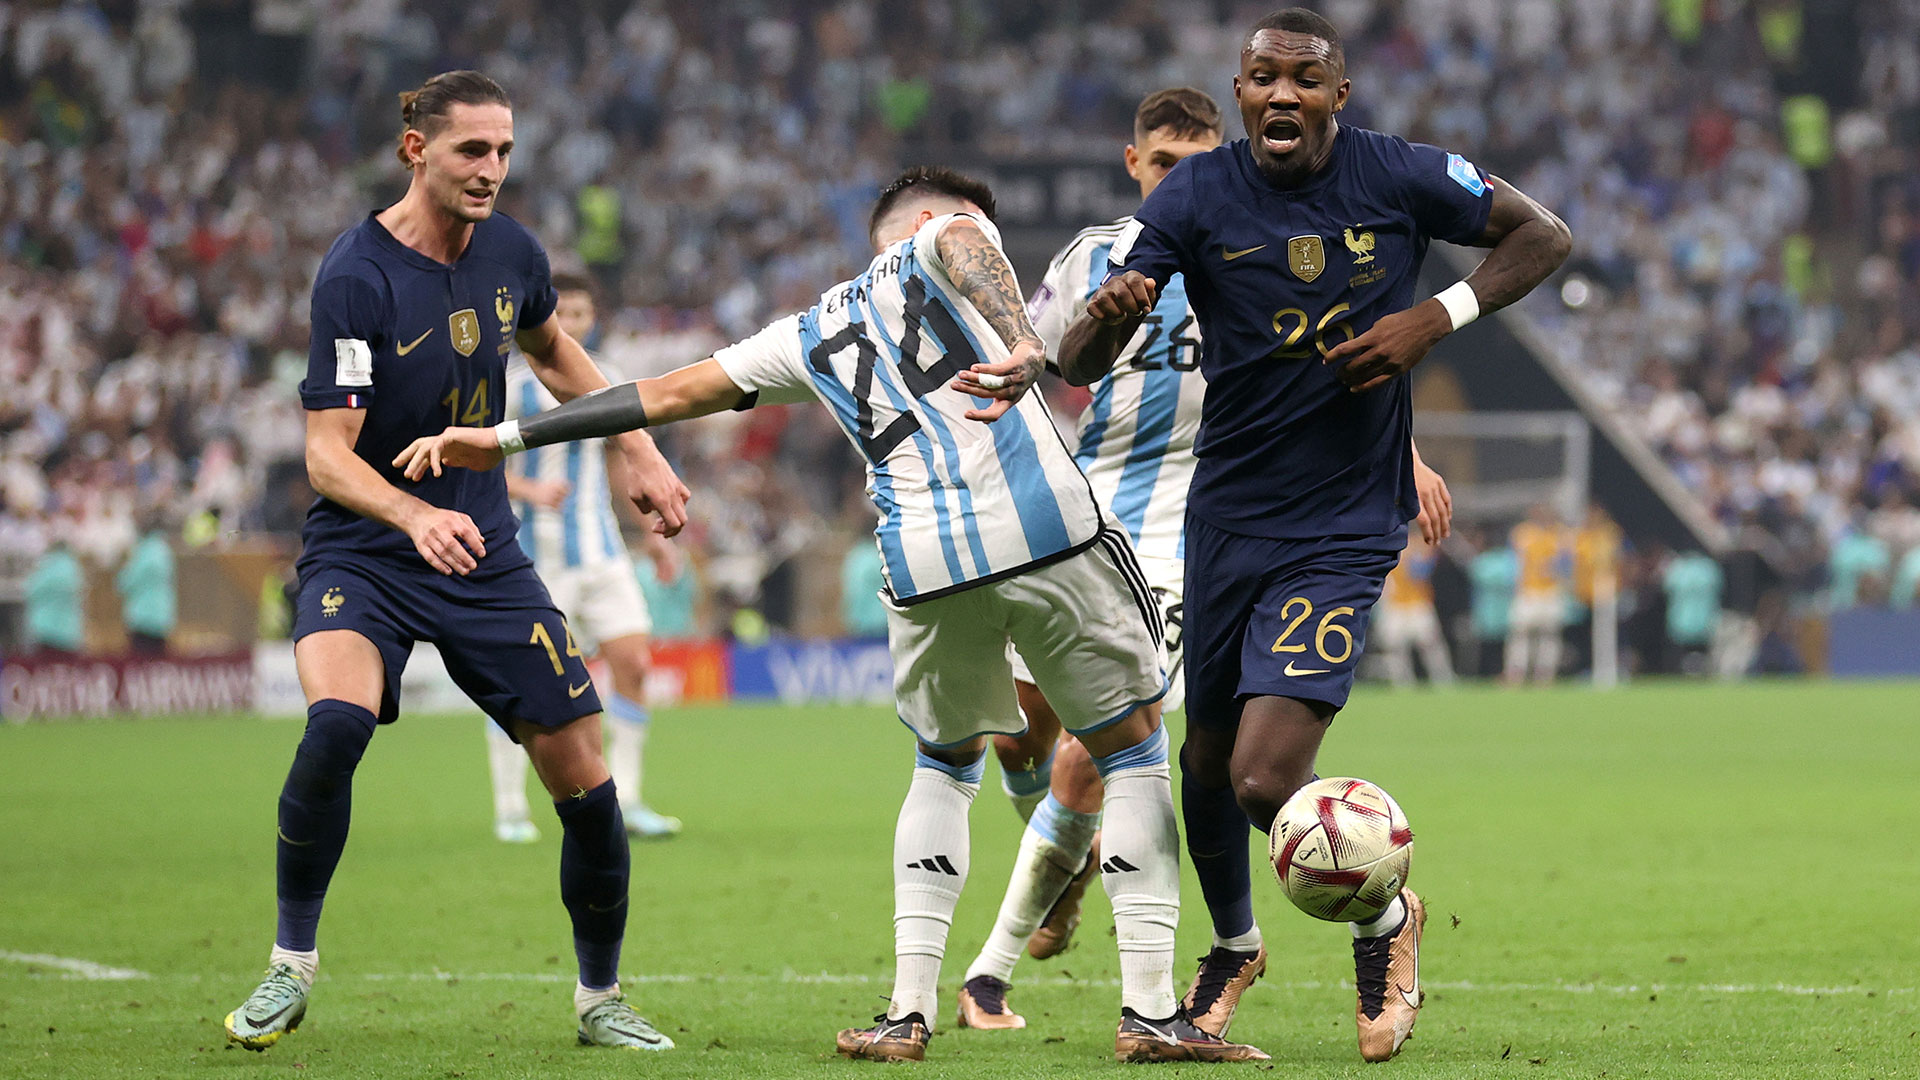 Marcus Thuram na final contra a Argentina (Foto: Catherine Ivill/Getty Images)